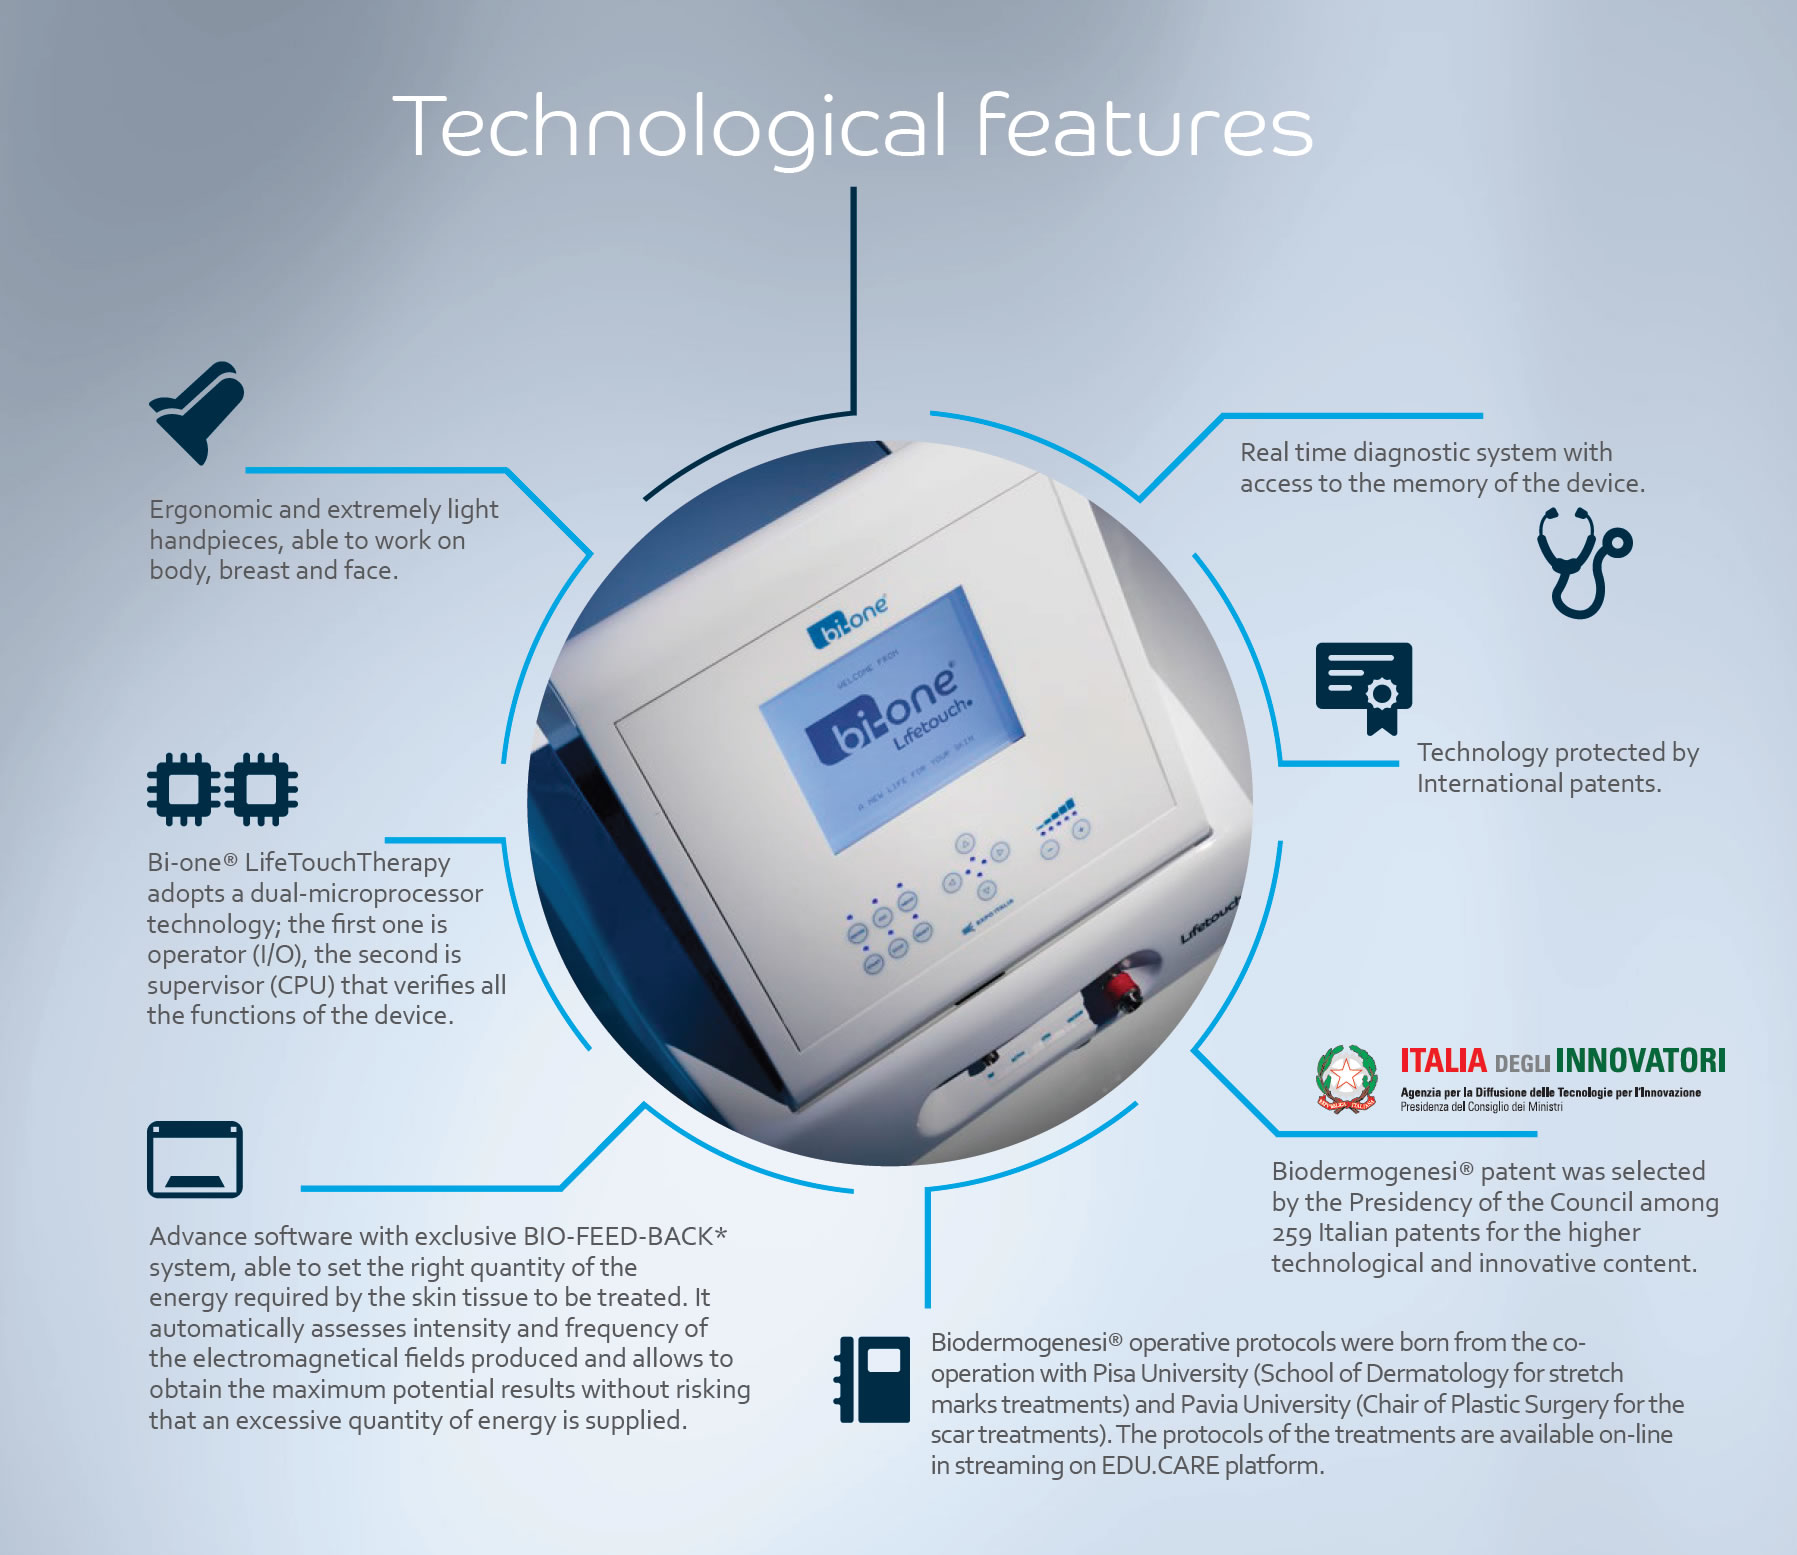 This is an image that shows the technological features of the Bi-One LifeTouchTherapy.